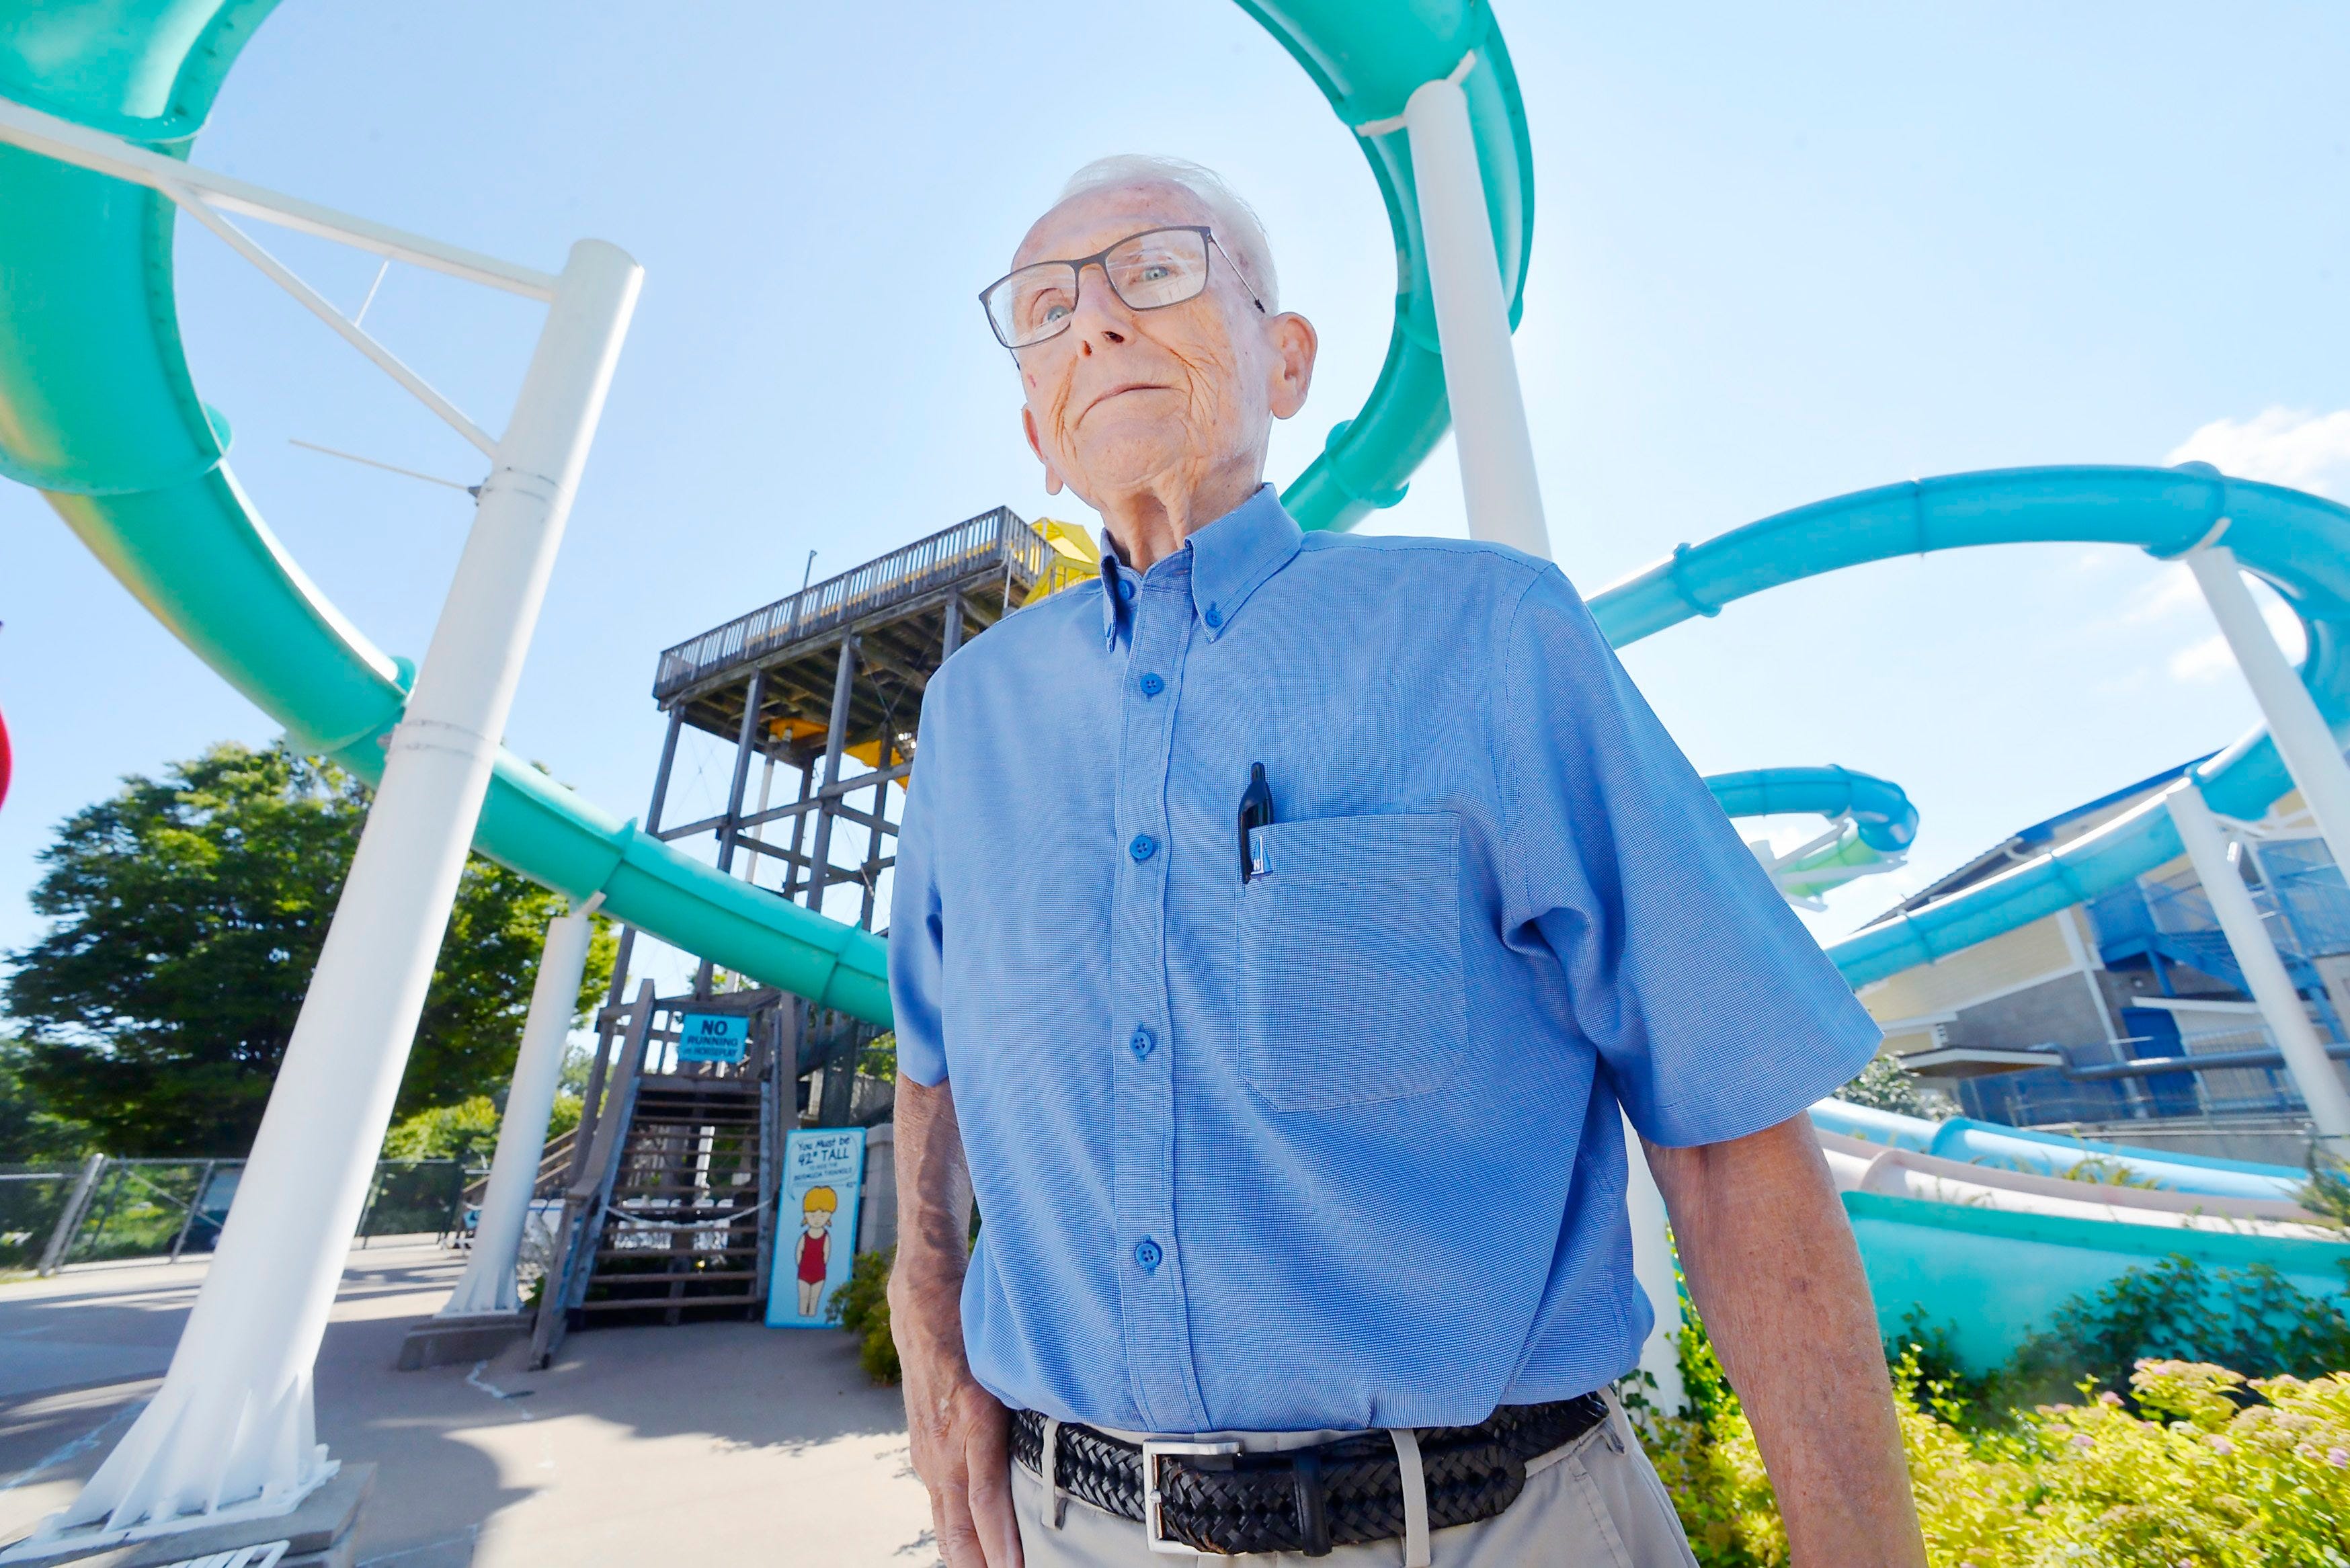 Waldameer Park & Water World owner Paul Nelson, 89, describes the path of a new $9 million water slide planned for the park during a tour in Millcreek Township on Aug. 27.